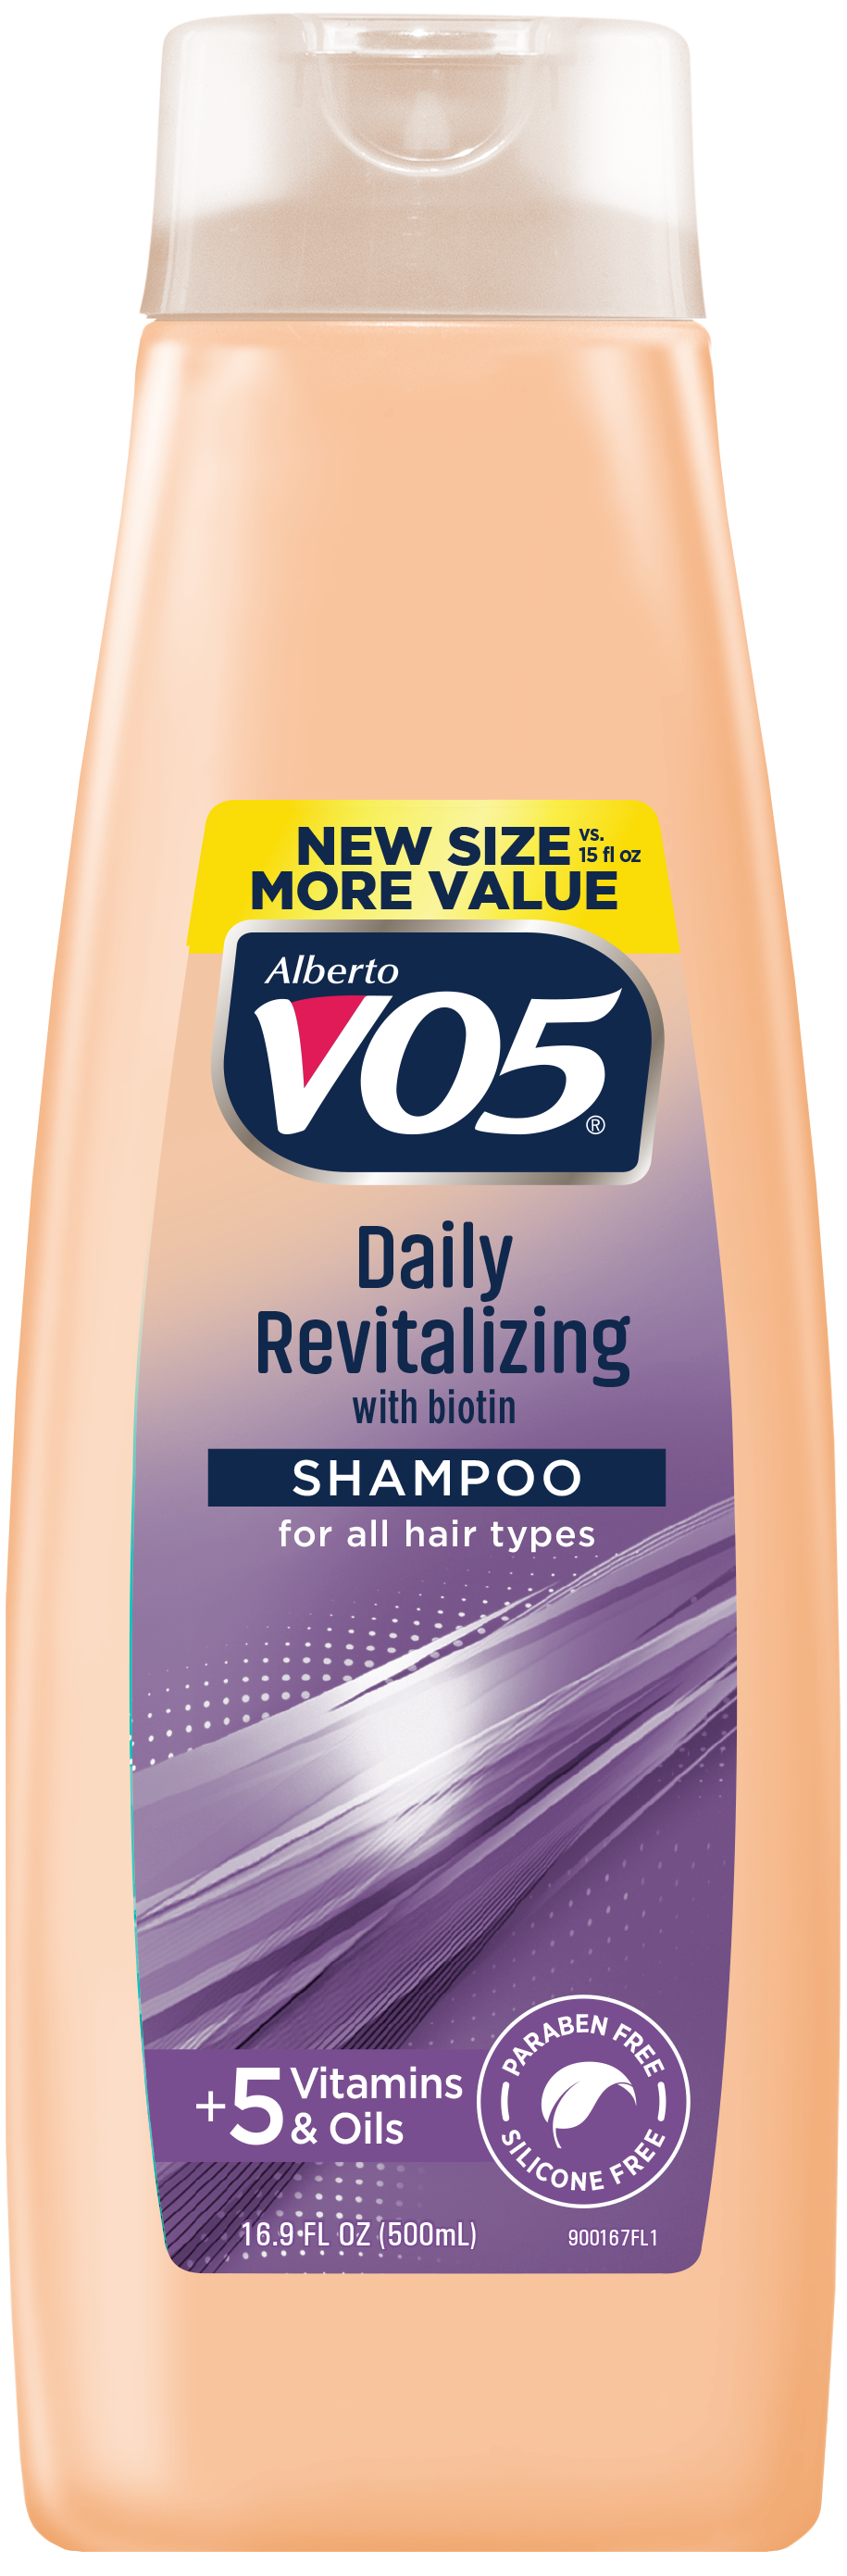 Alberto VO5 Daily Revitalizing Shampoo with Biotin, for All Hair Types,16.9 fl oz - image 1 of 6